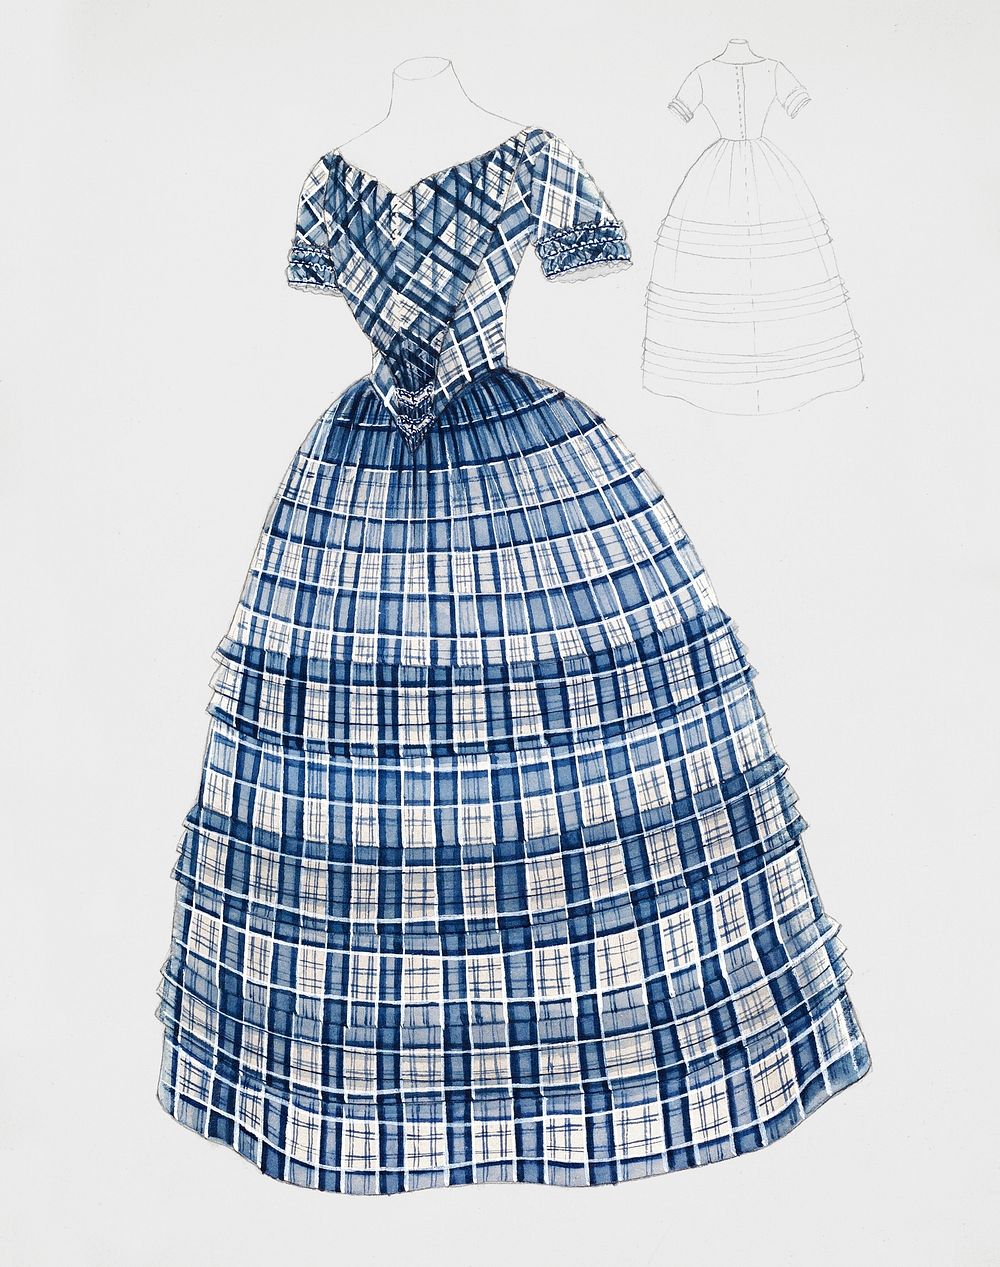 Dress (c. 1936) by Bessie Forman. Original from The National Gallery of Art. Digitally enhanced by rawpixel.